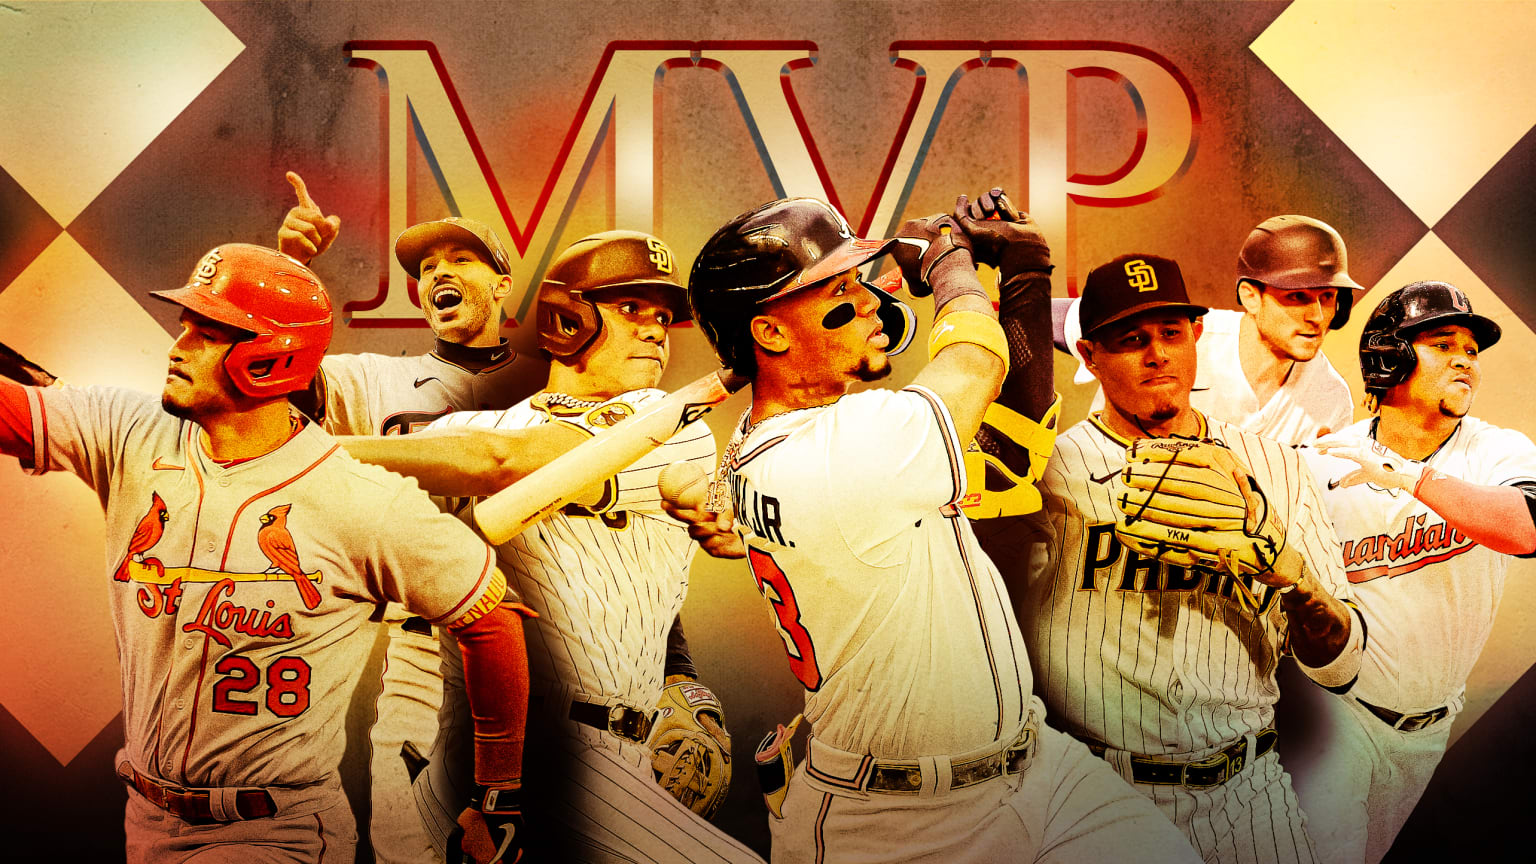 Montage of 7 active star players who could soon win their first MVP Award